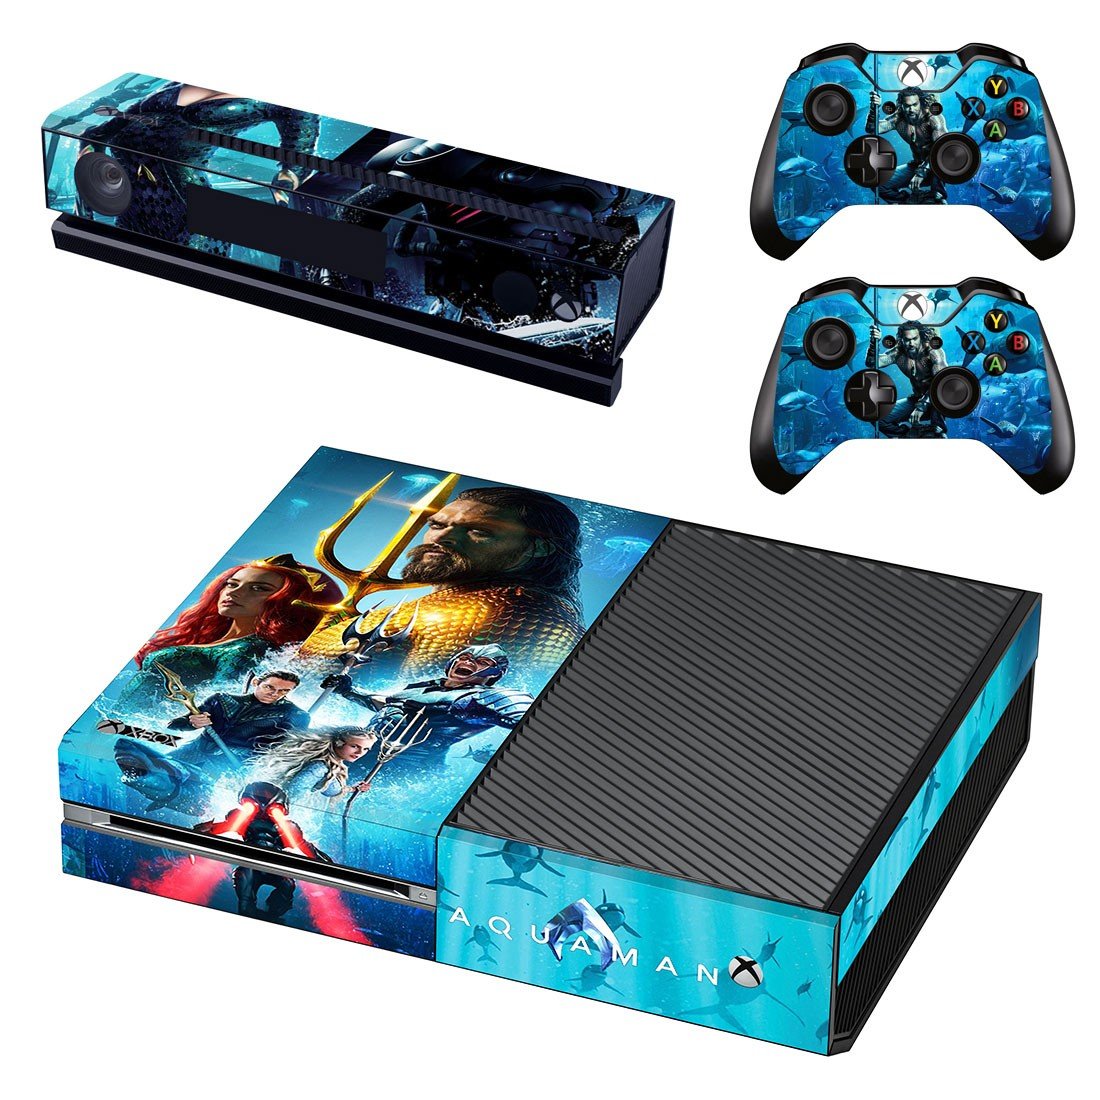 Skin Cover for Xbox One - AquaMan Design 1